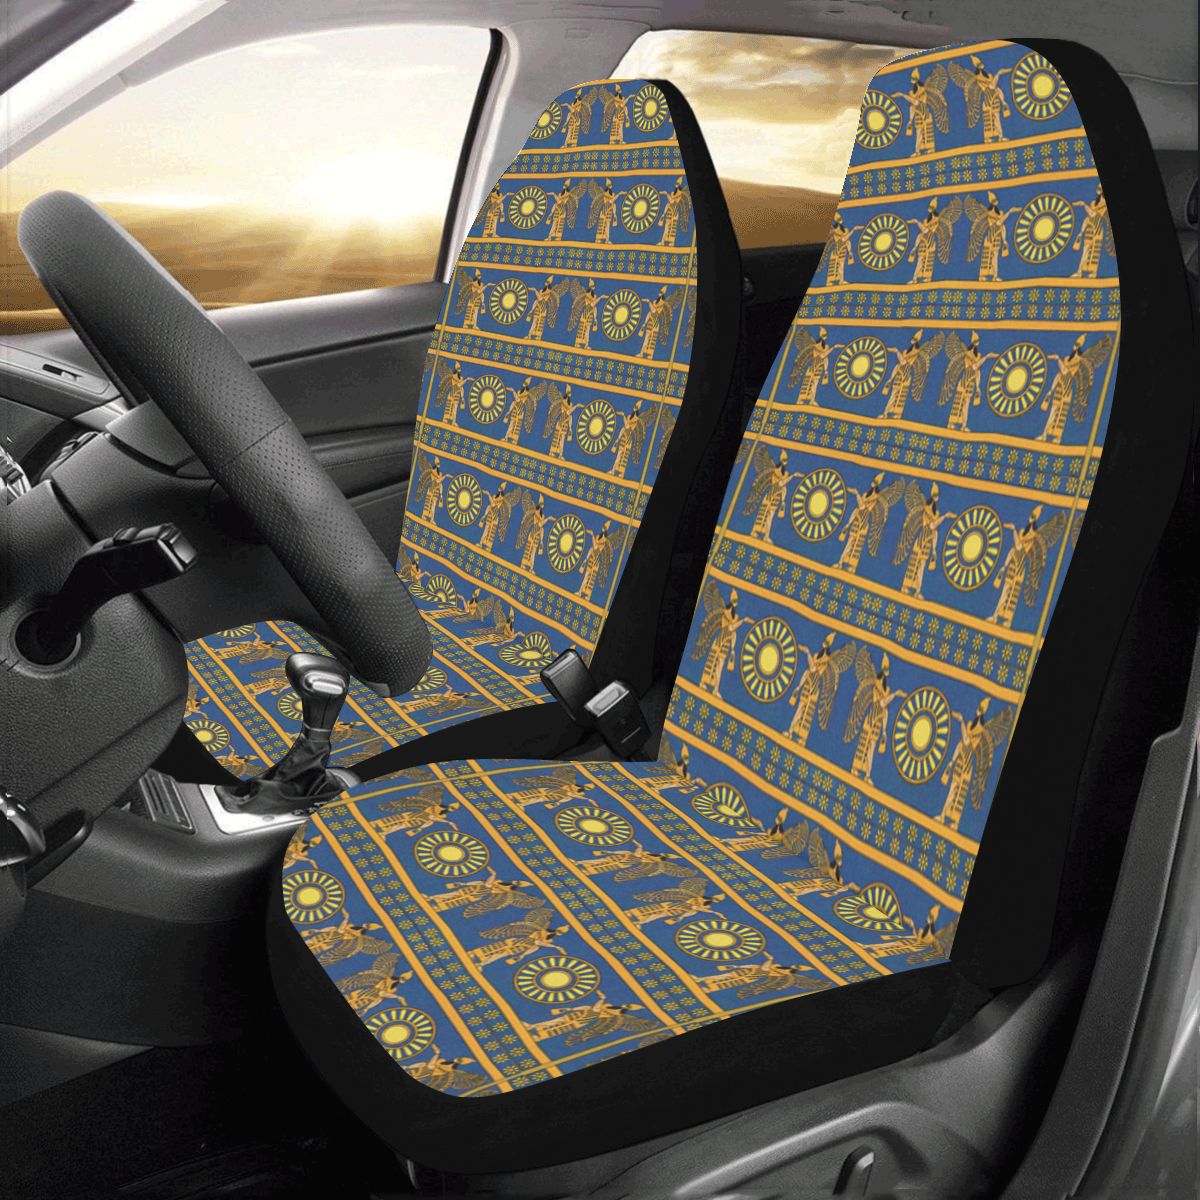 Pattern assyrian kings Car Seat Covers (Set of 2)